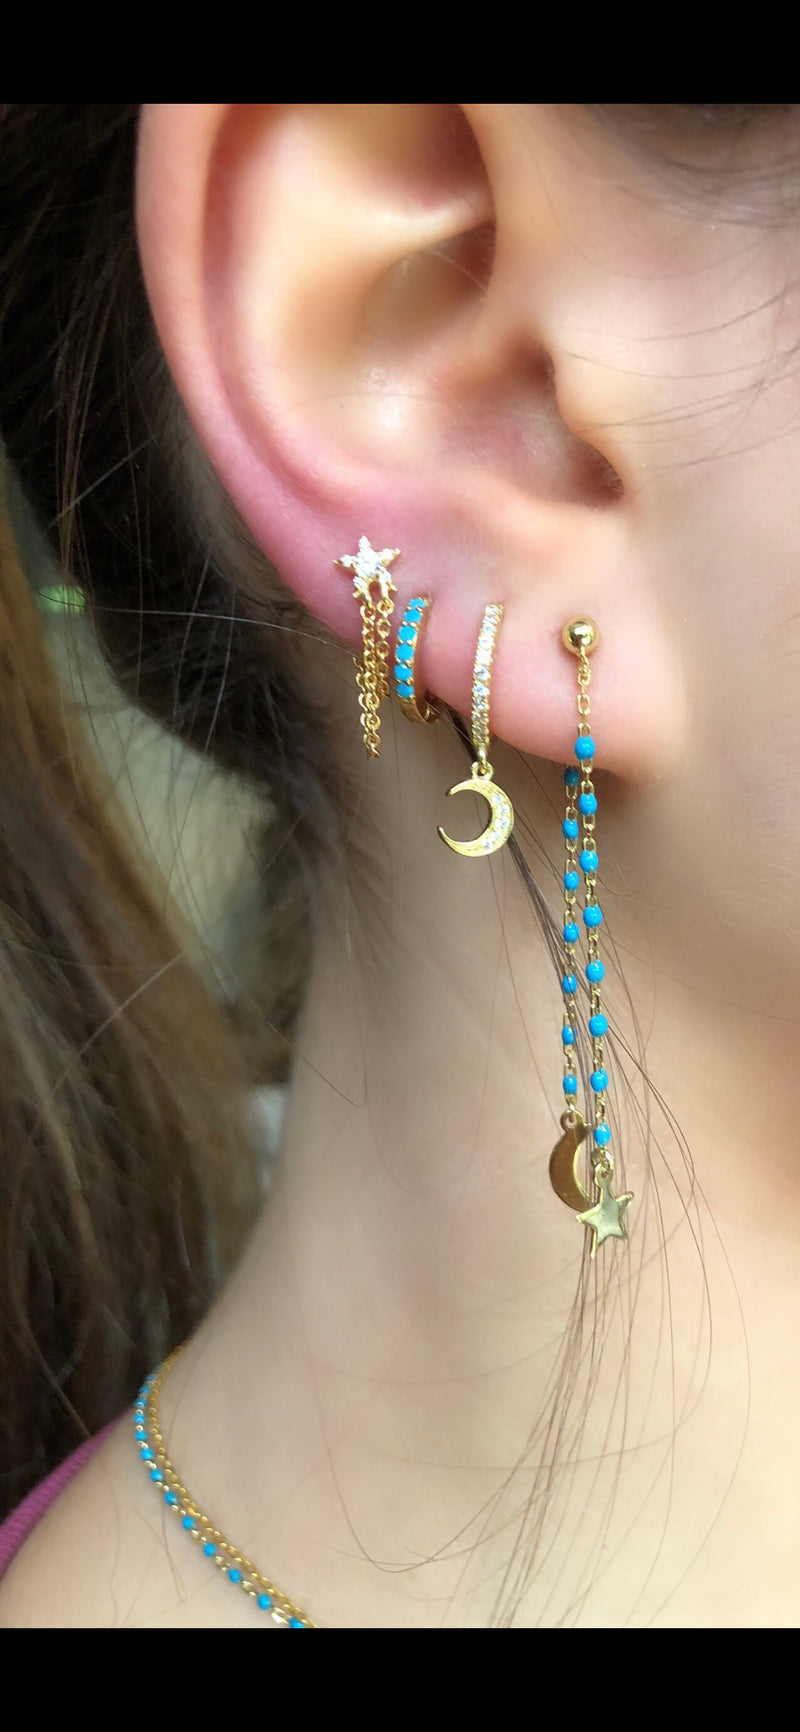 Yellow Gold Star with double chain wrap earrings